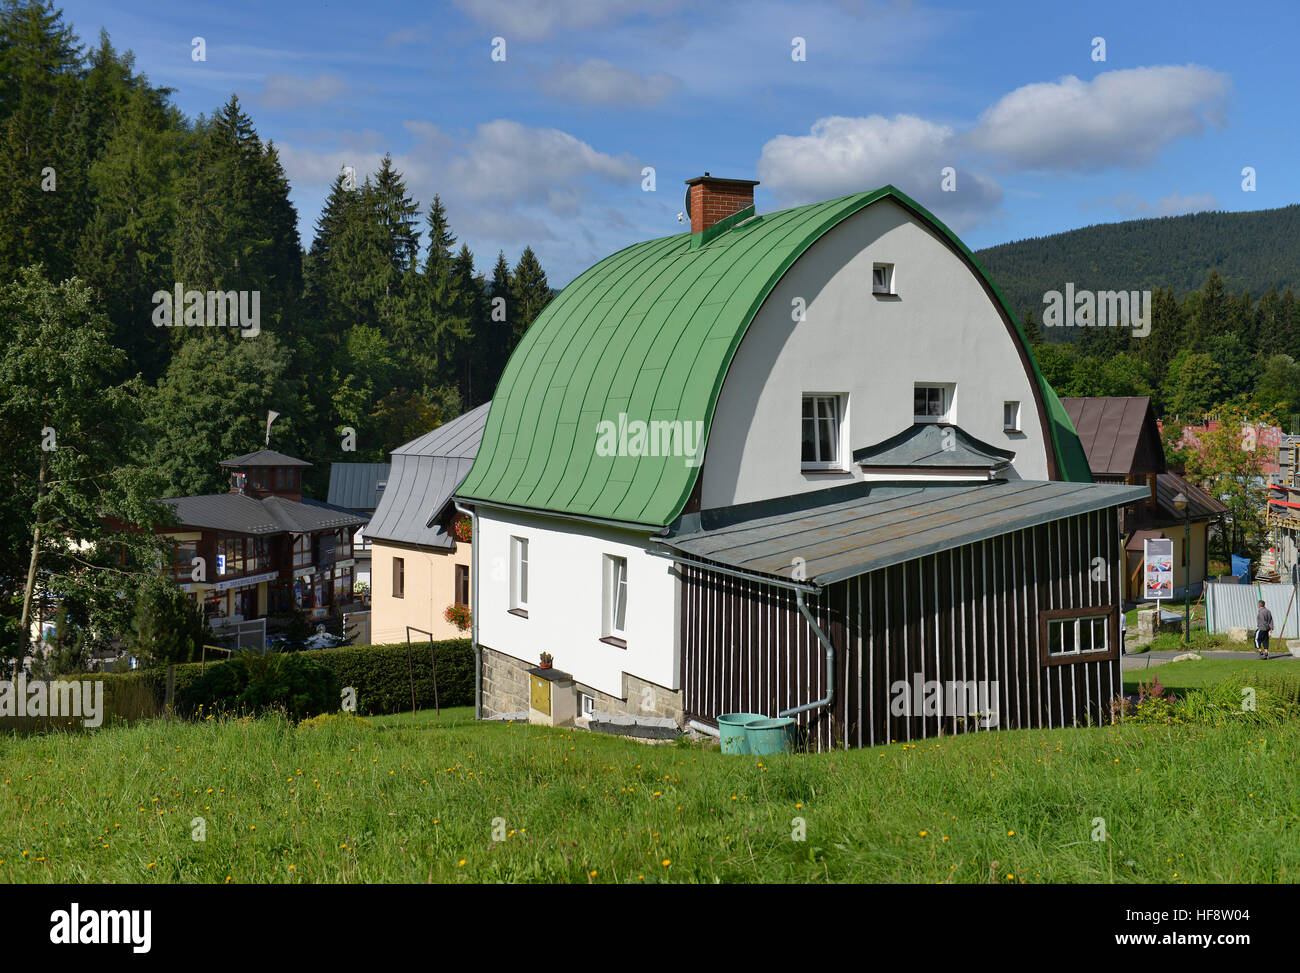 Wohnhaus, Spindlersmuehle, Tschechien, Dwelling house, wooden spindle maker's mill, Czechia Stock Photo